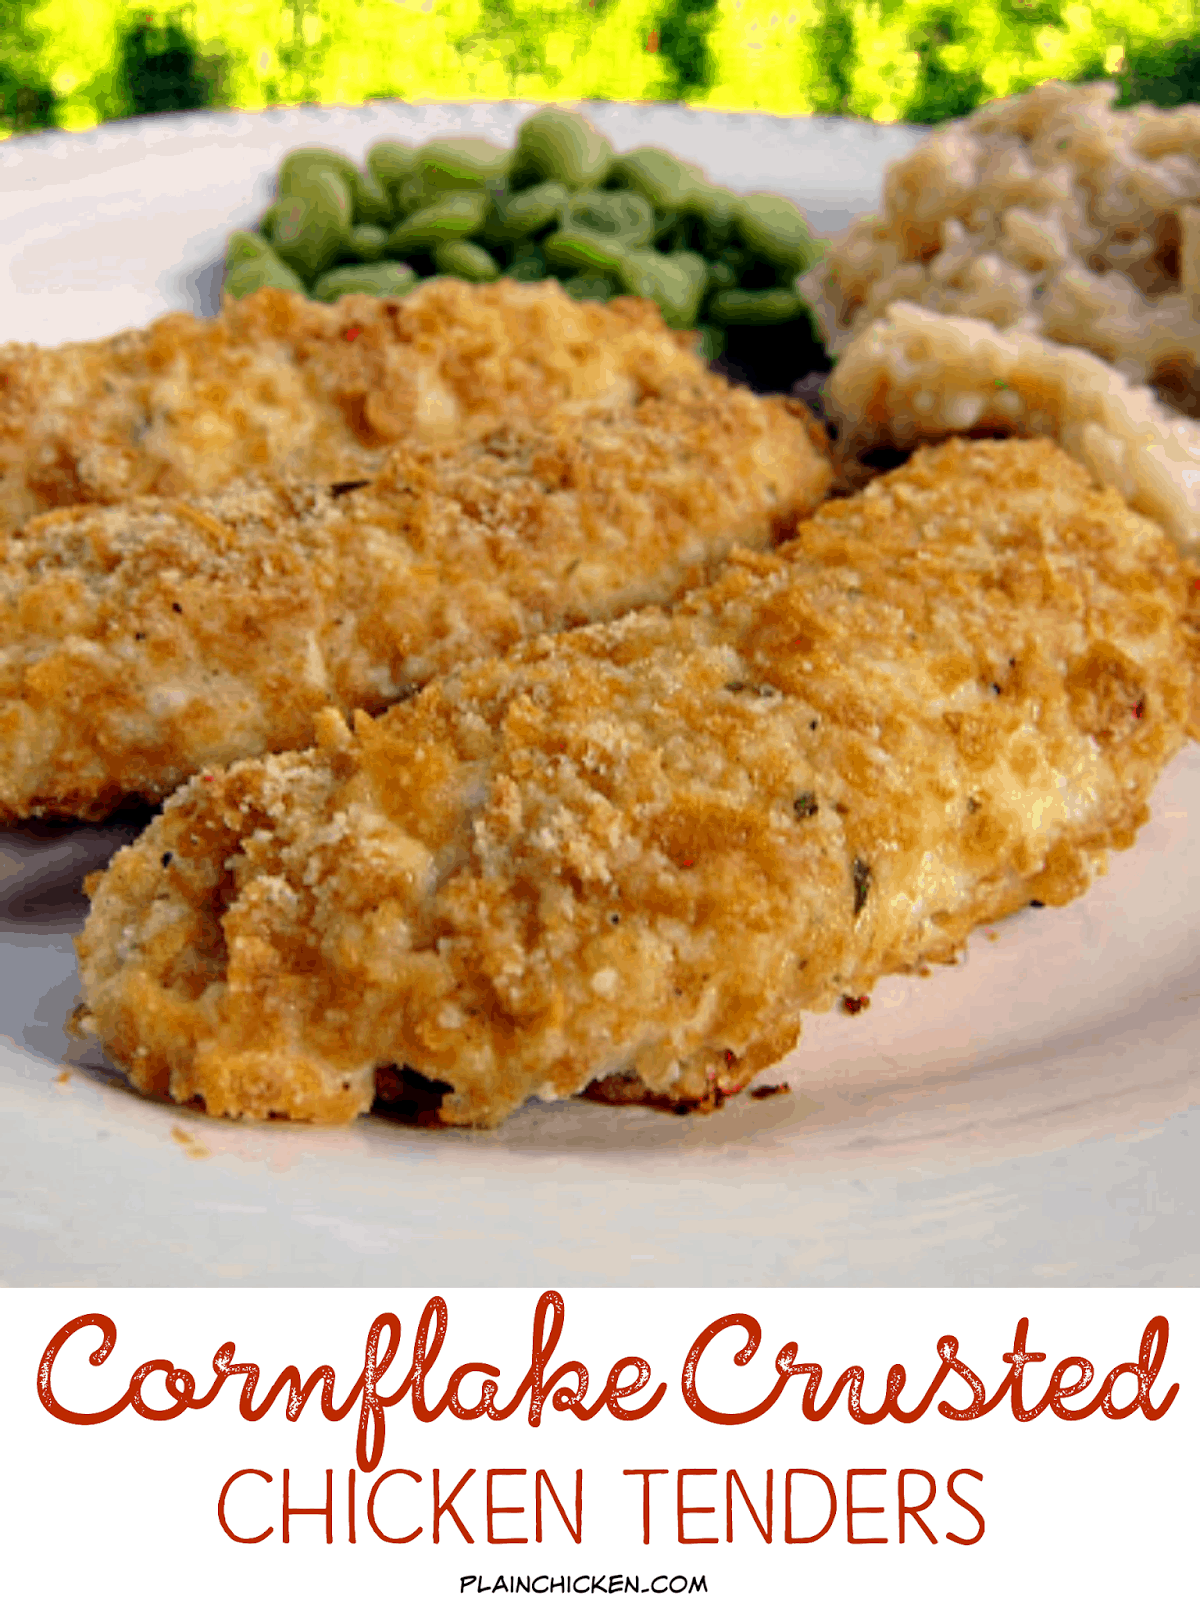 Cornflake Chicken Fingers - chicken tenders coated in crushed cornflakes, parmesan cheese and Ranch dressing mix - SO easy and SOOO good! Kids gobble these up! Ready in 15 minutes!! You can make these ahead of time and freeze them for a quick meal later.